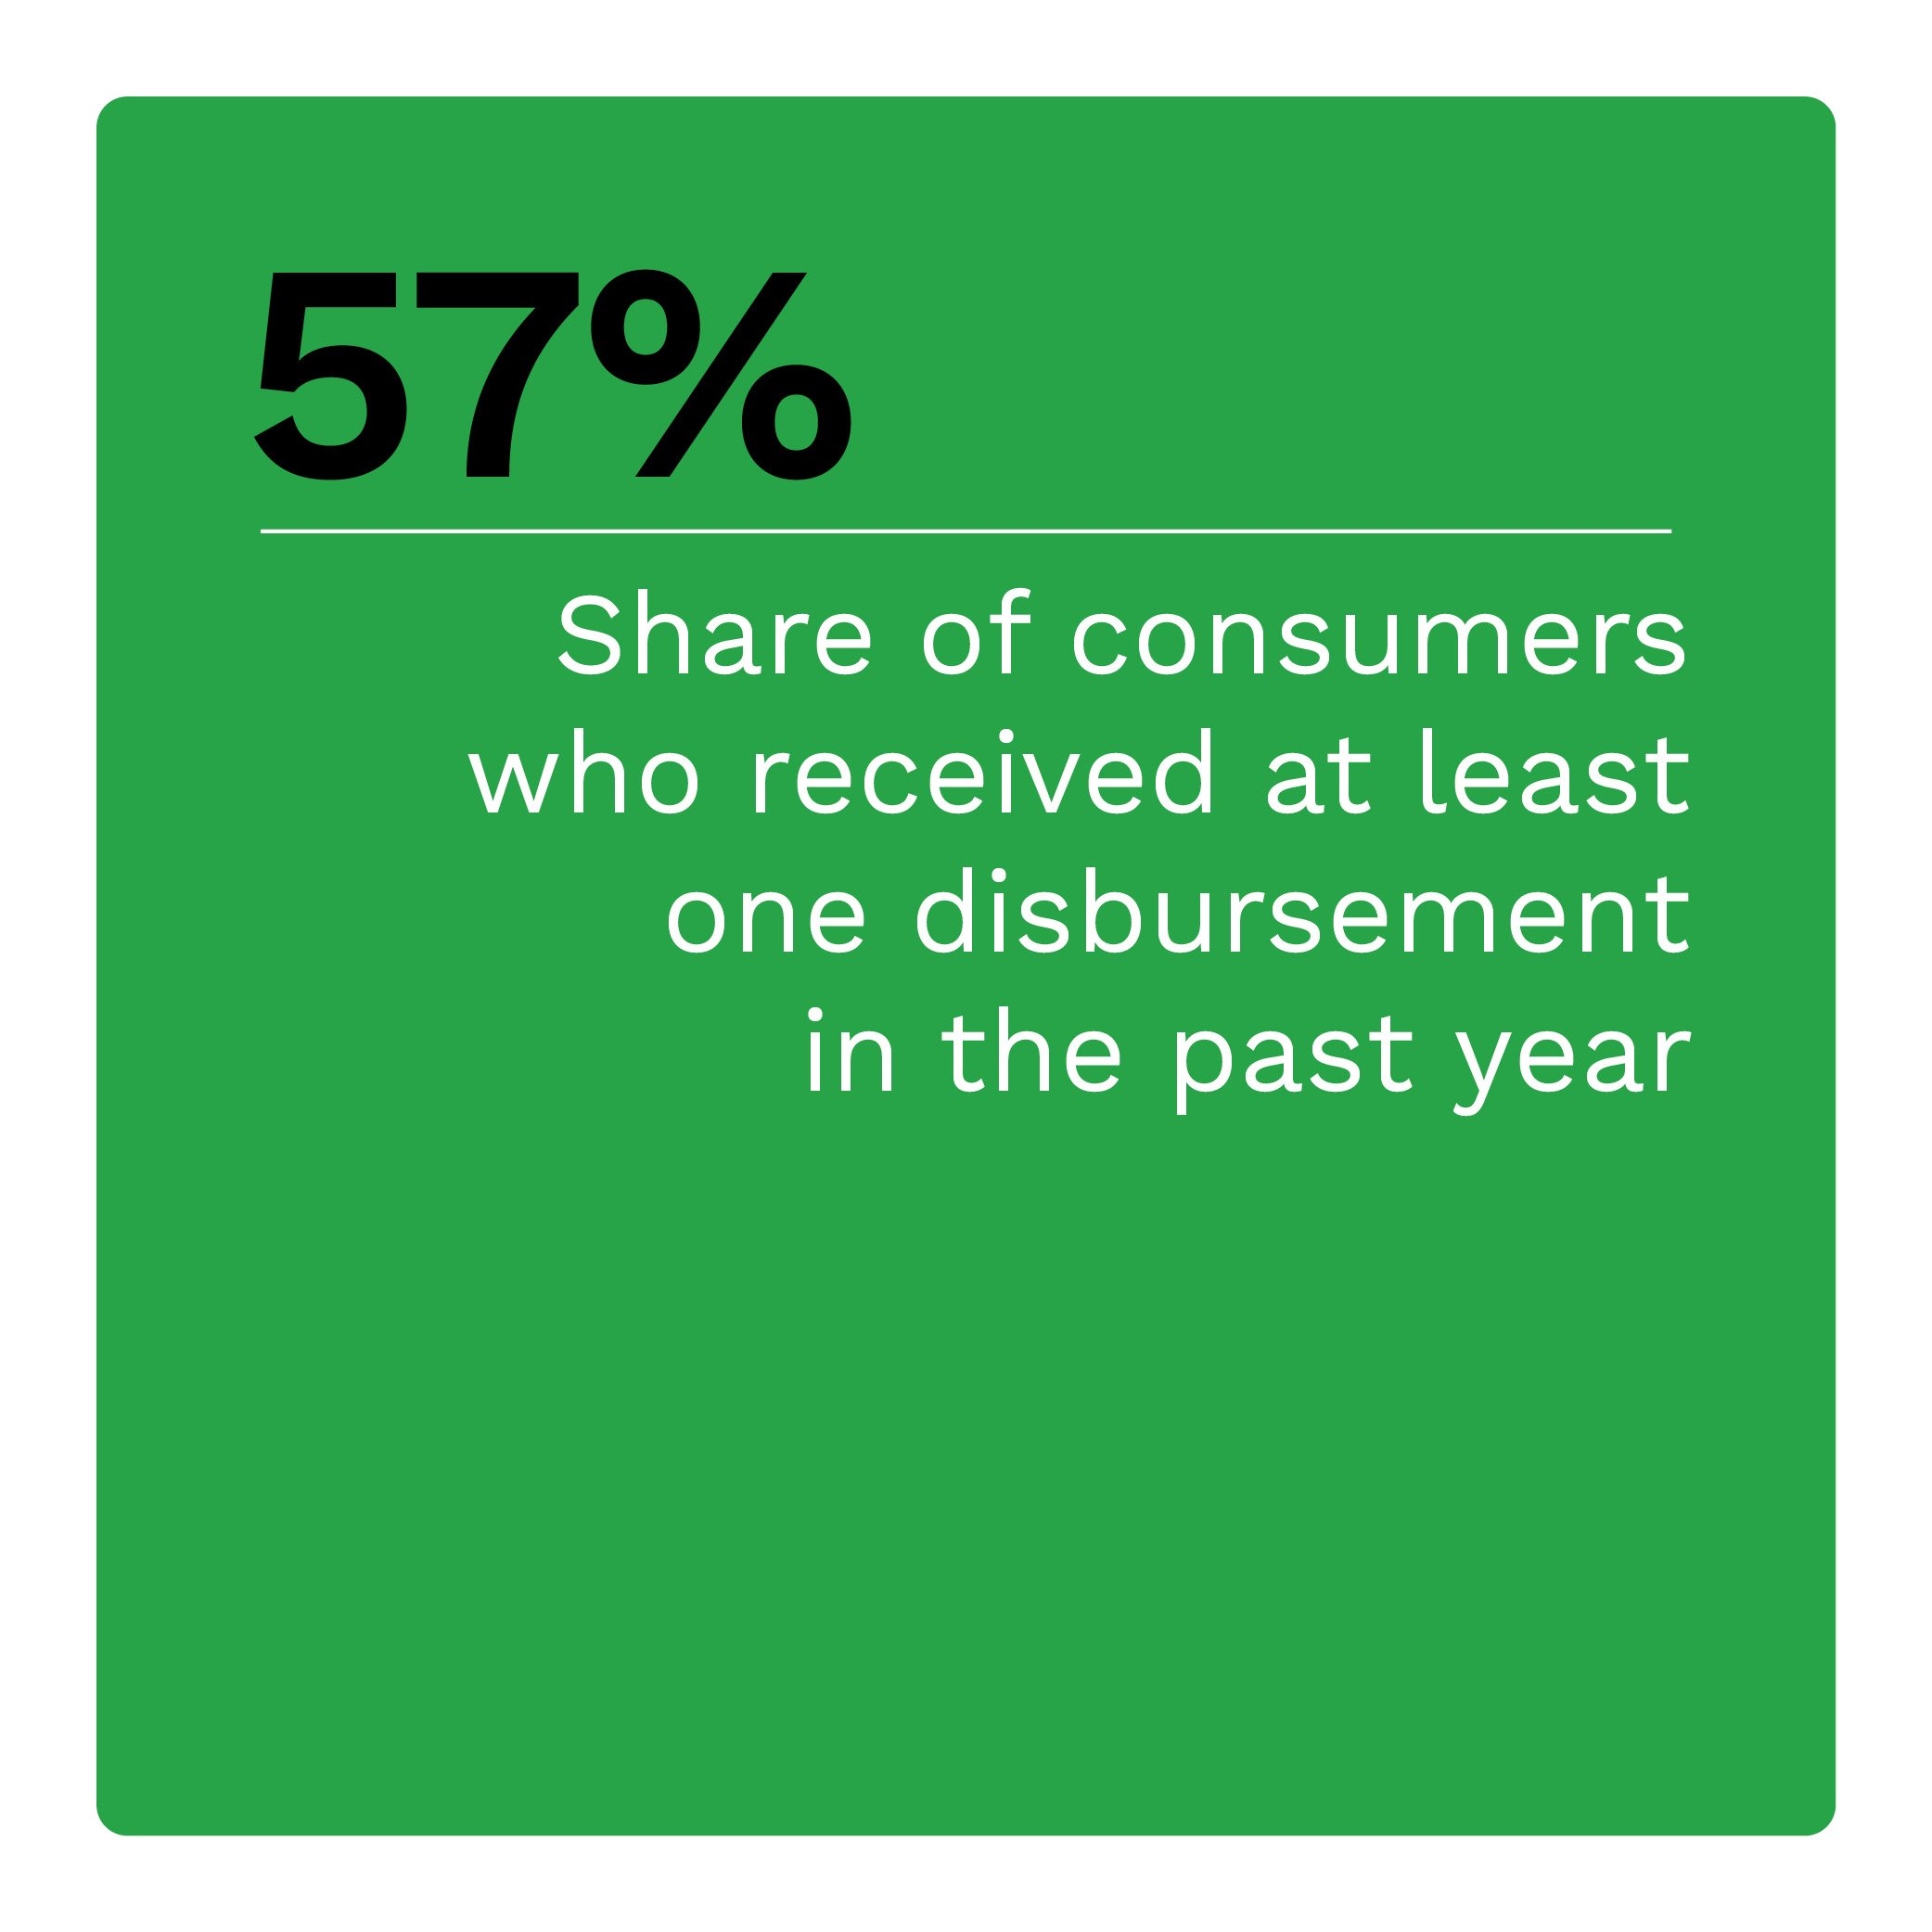  Share of consumers who received at least one disbursement in the past year